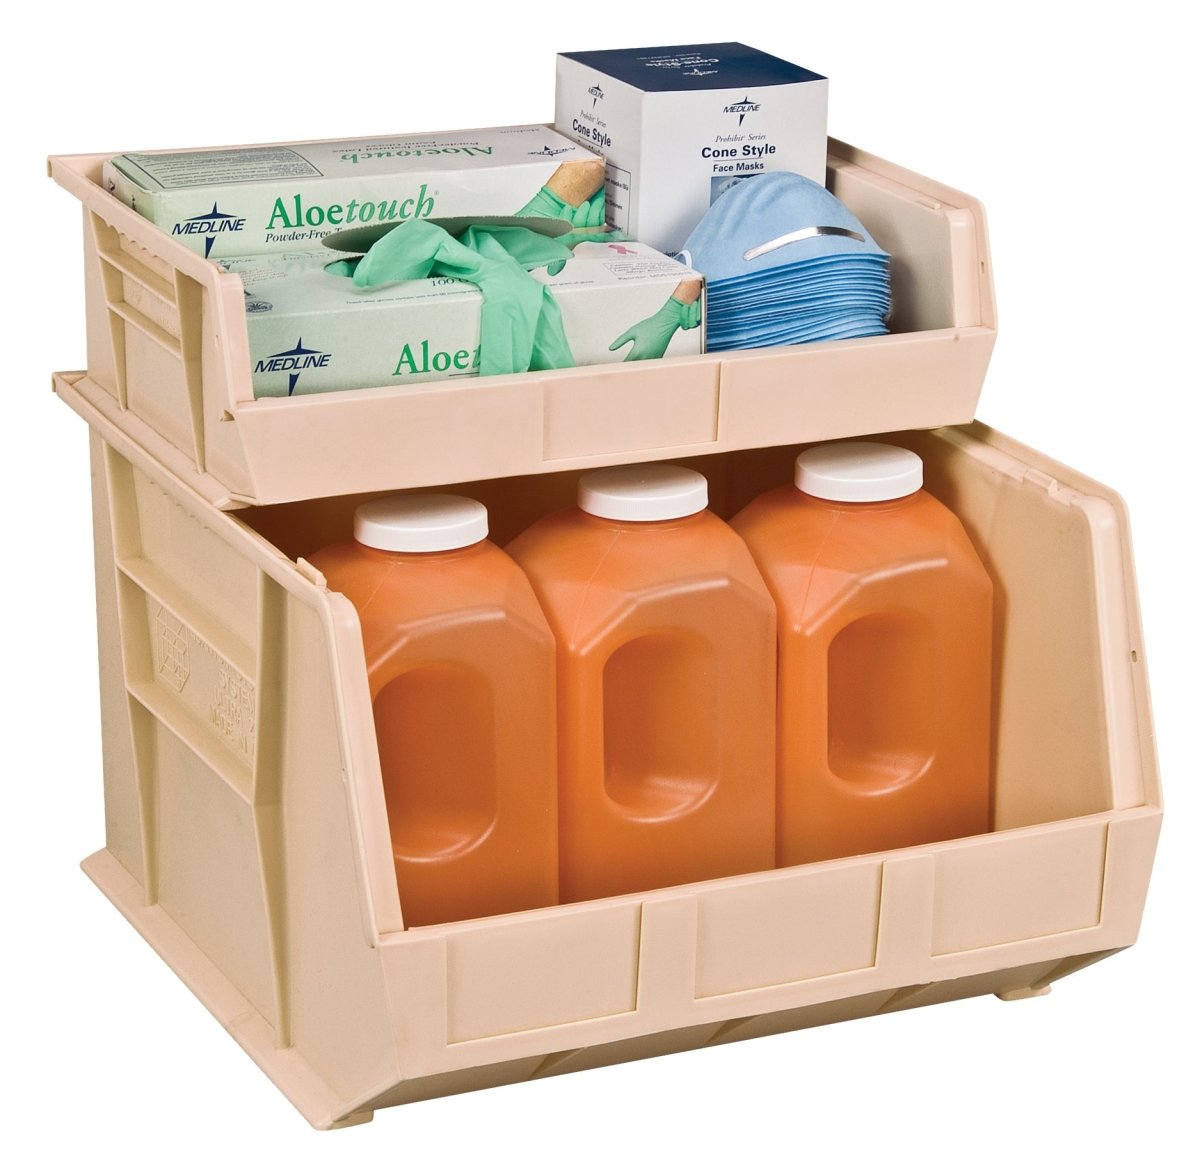 Plastic Bins: Organization, Storage, and Sustainability - Industrial 4 Less